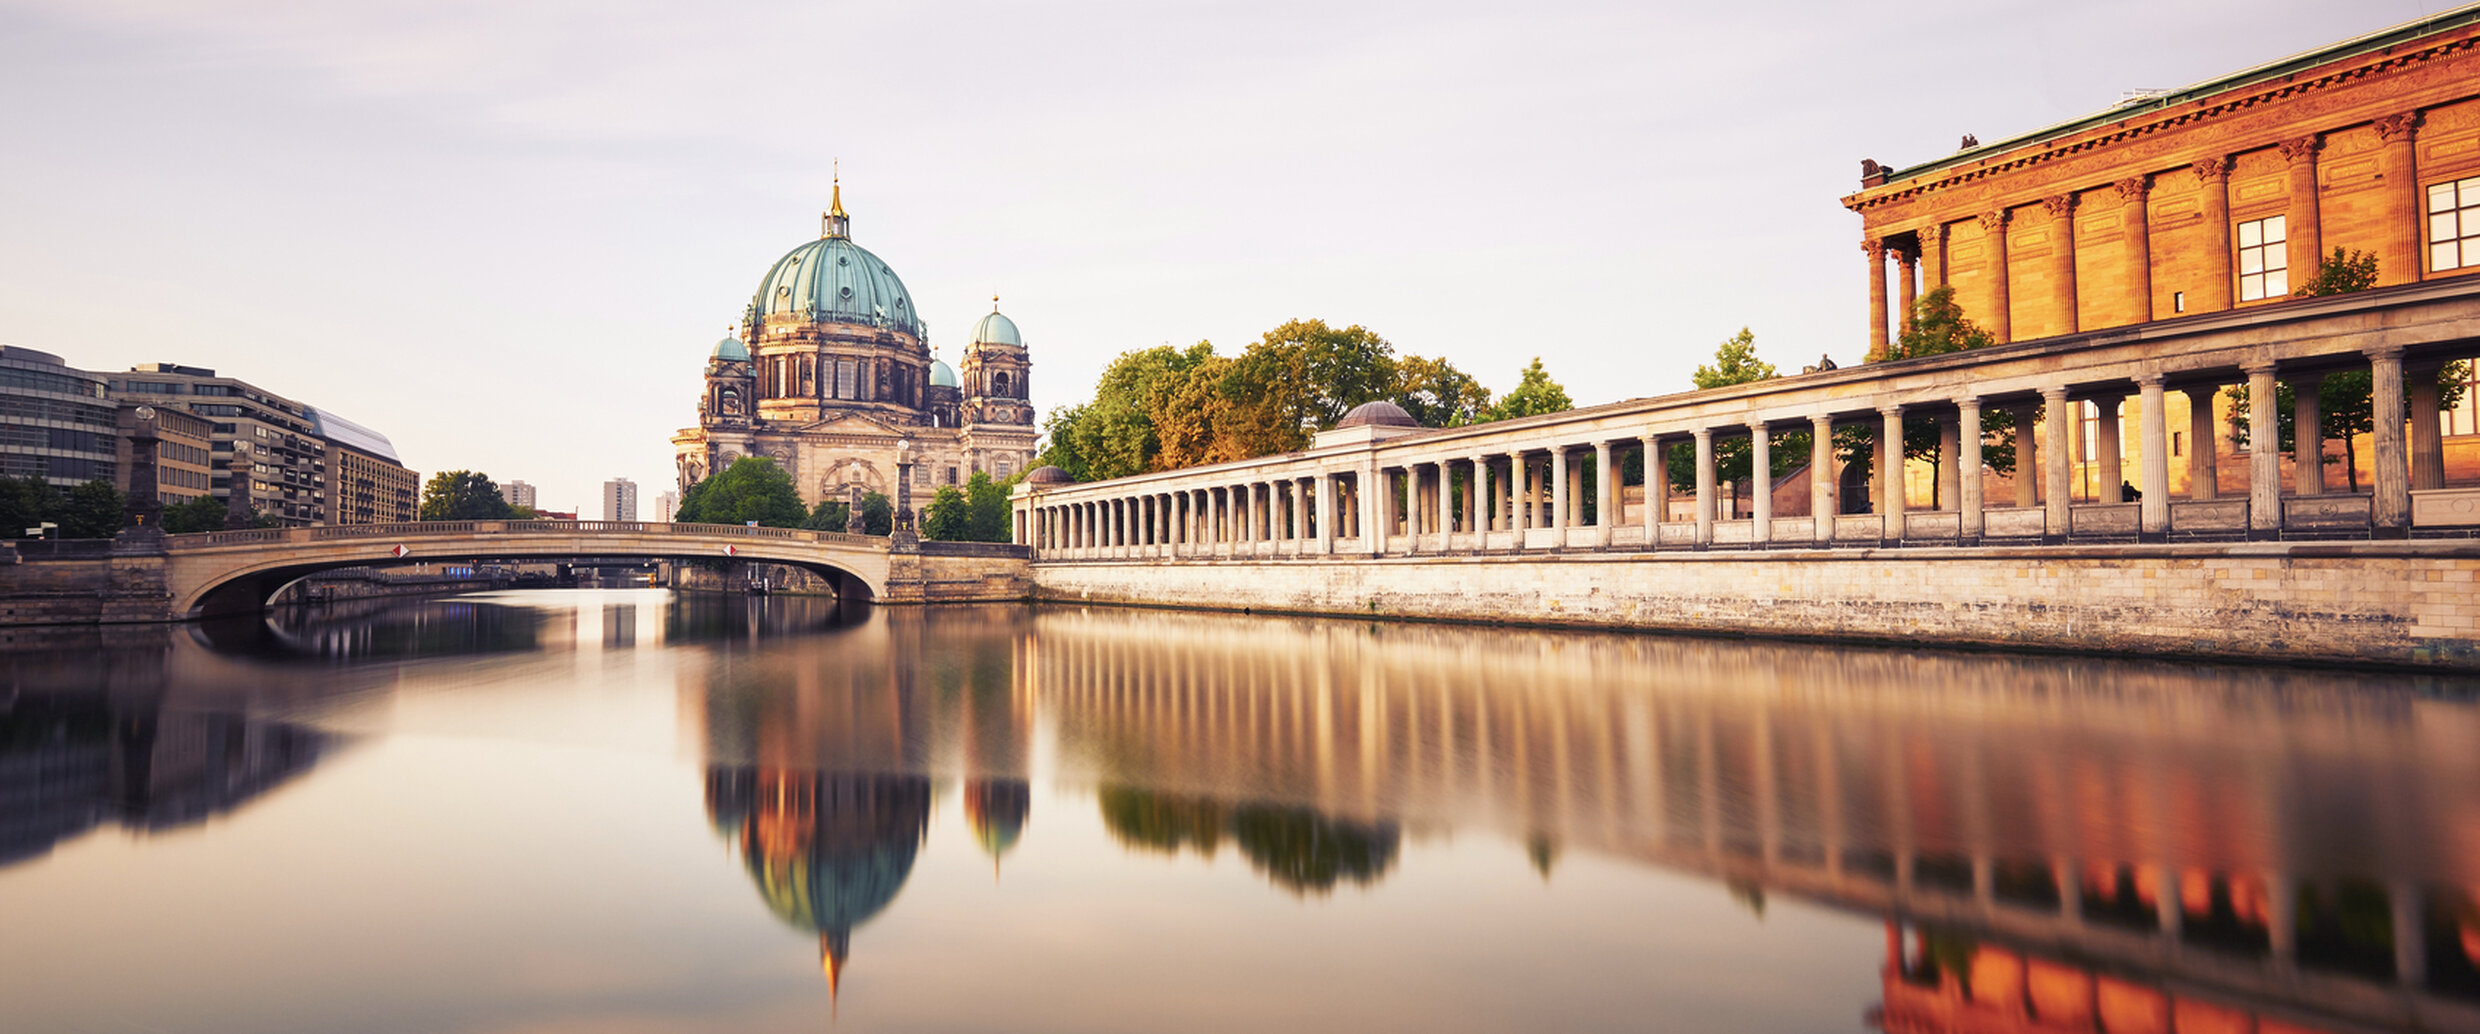 Museum Island in Berlin welcomes millions of tourists every year